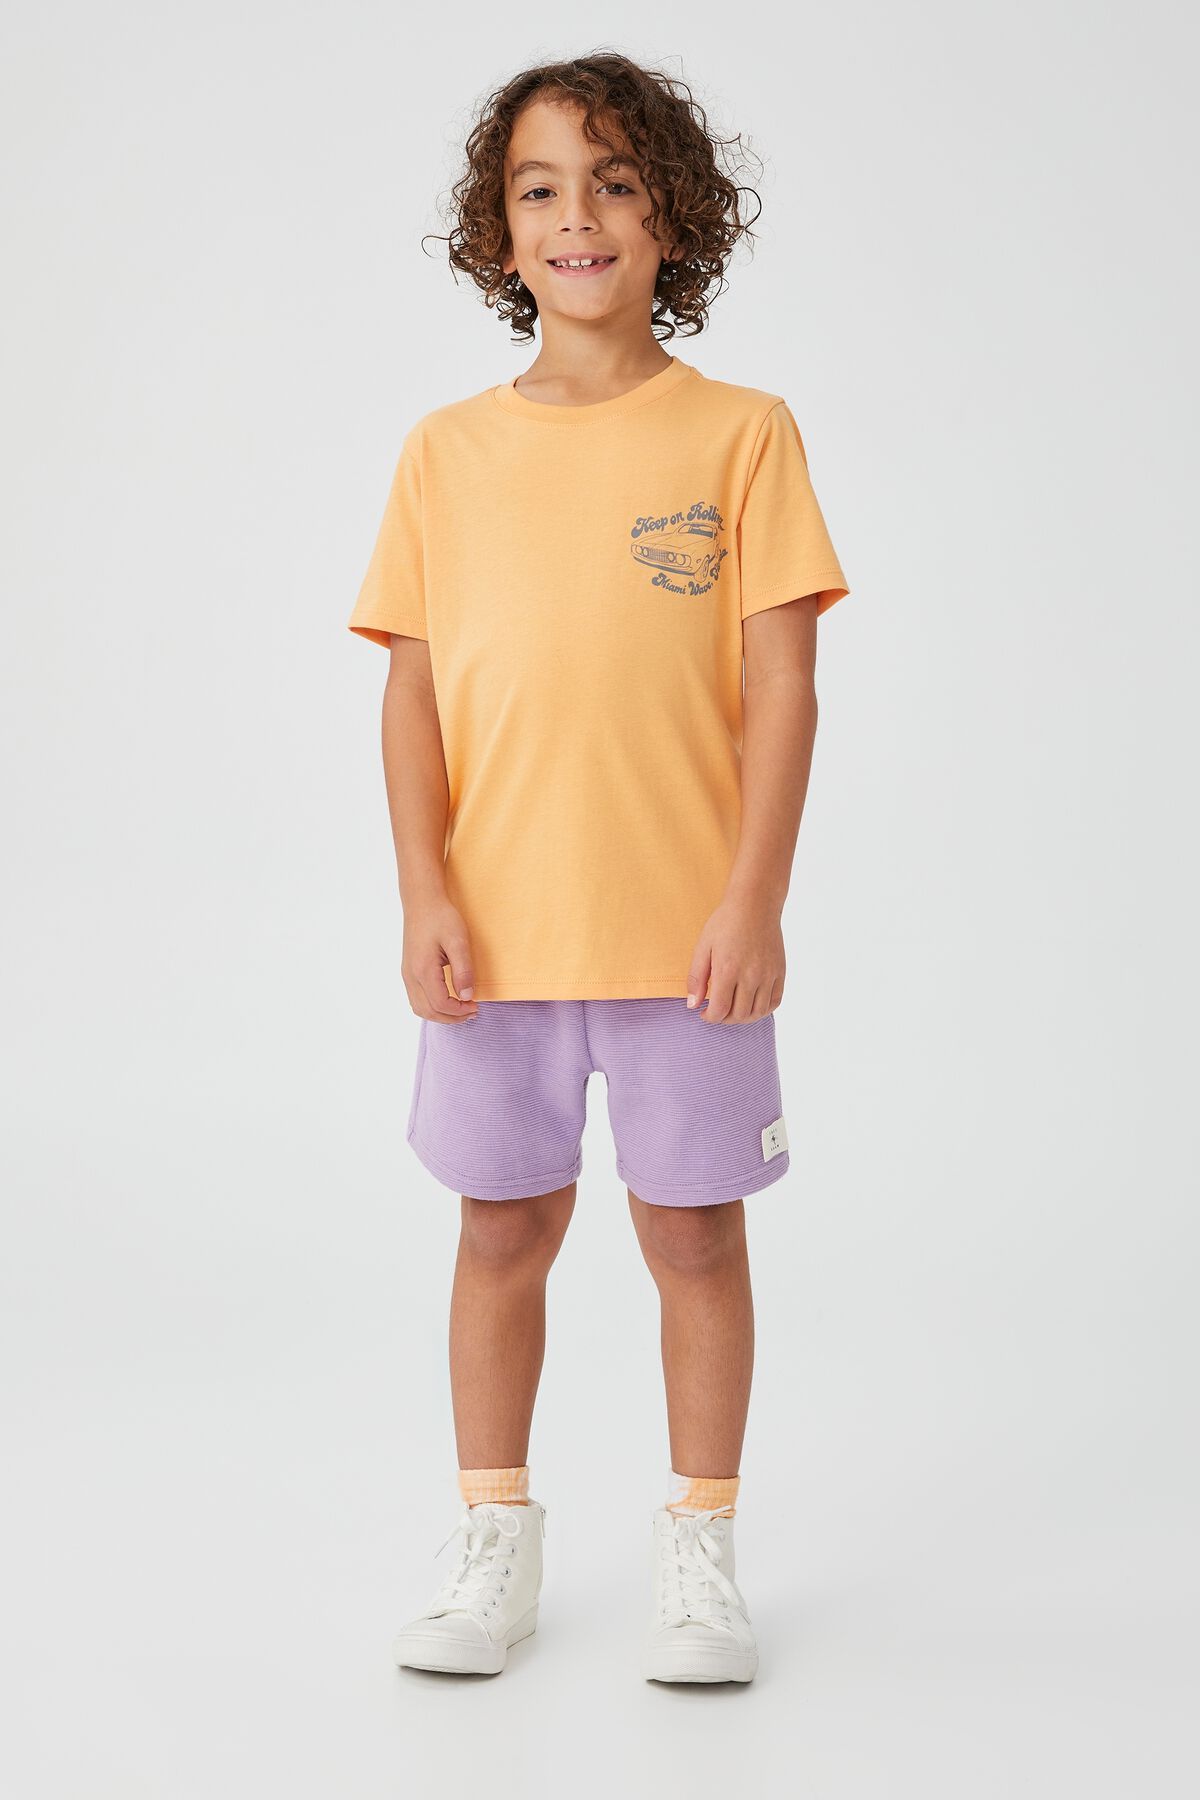 Max Skater Short Sleeve Tee | Cotton On (ANZ)